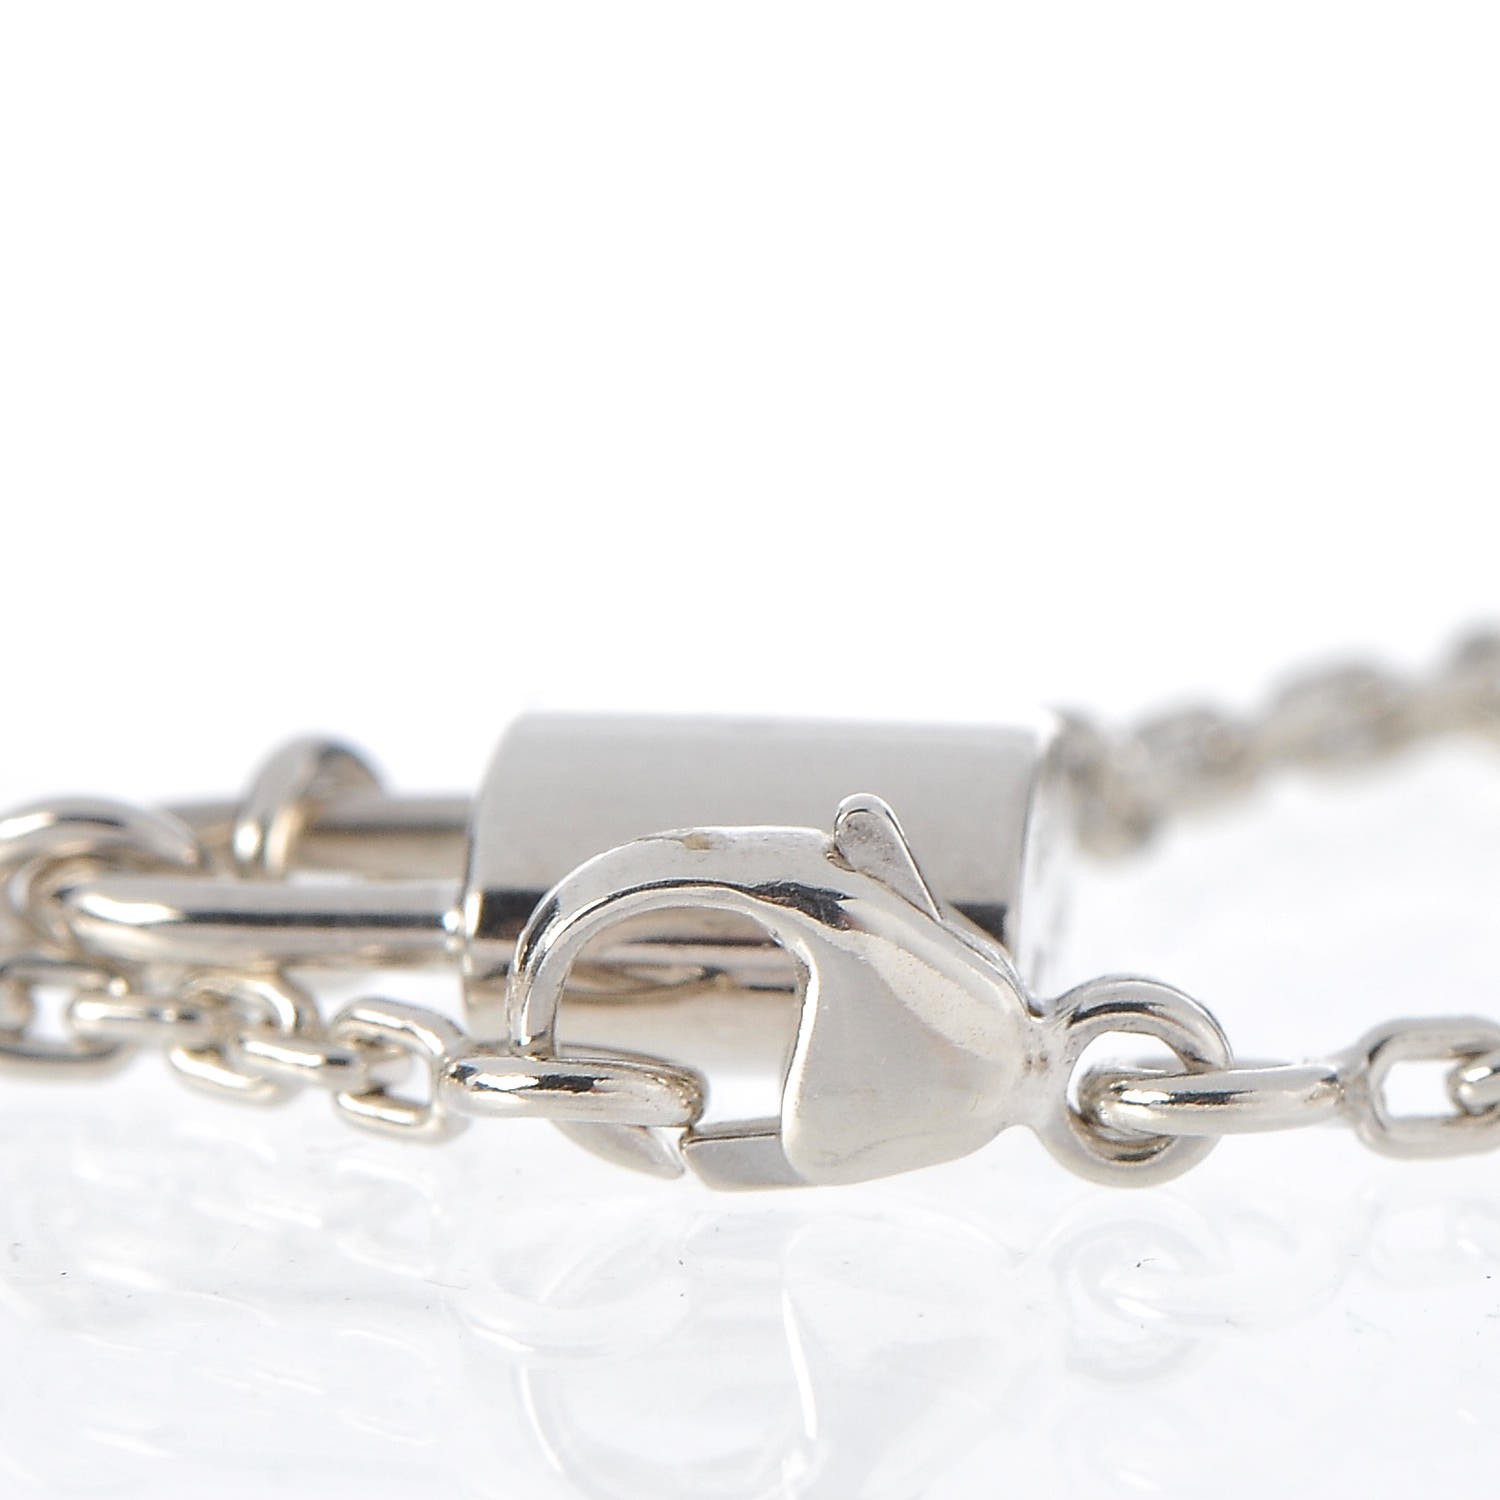 Products by Louis Vuitton: Silver Lockit bracelet, sterling silver